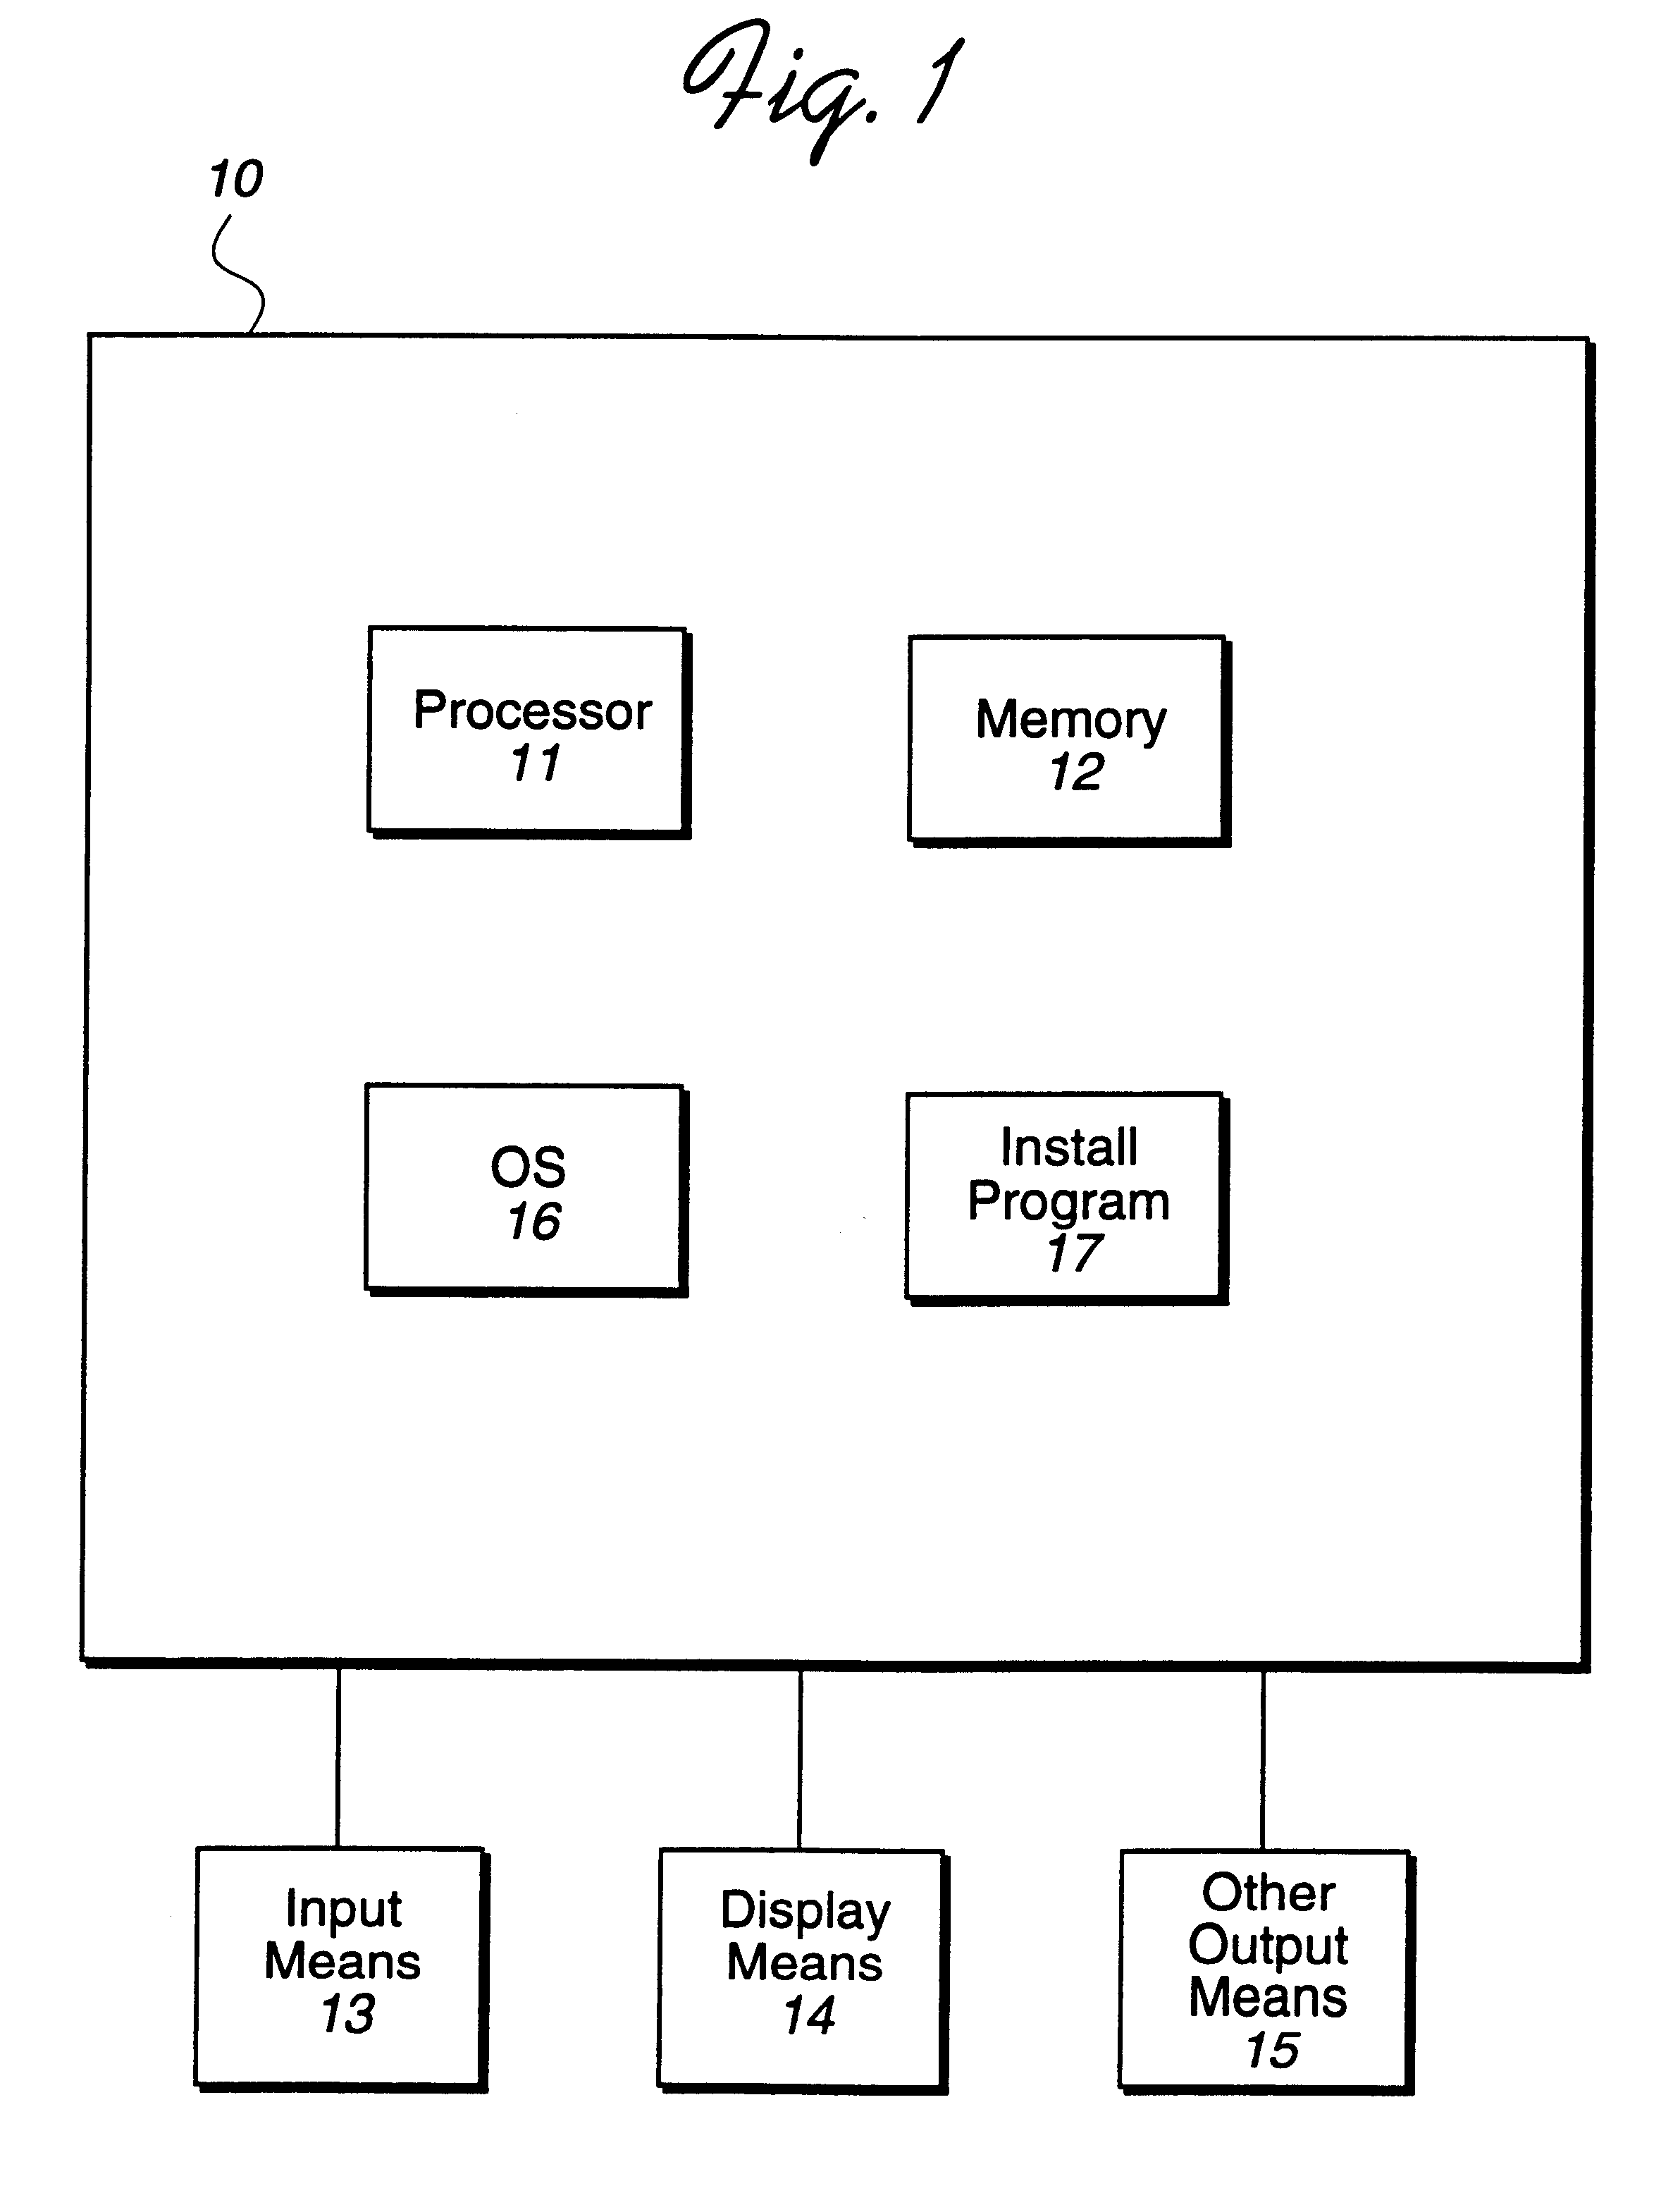 System, method, and program for updating registry objects with a cross-platform installation program